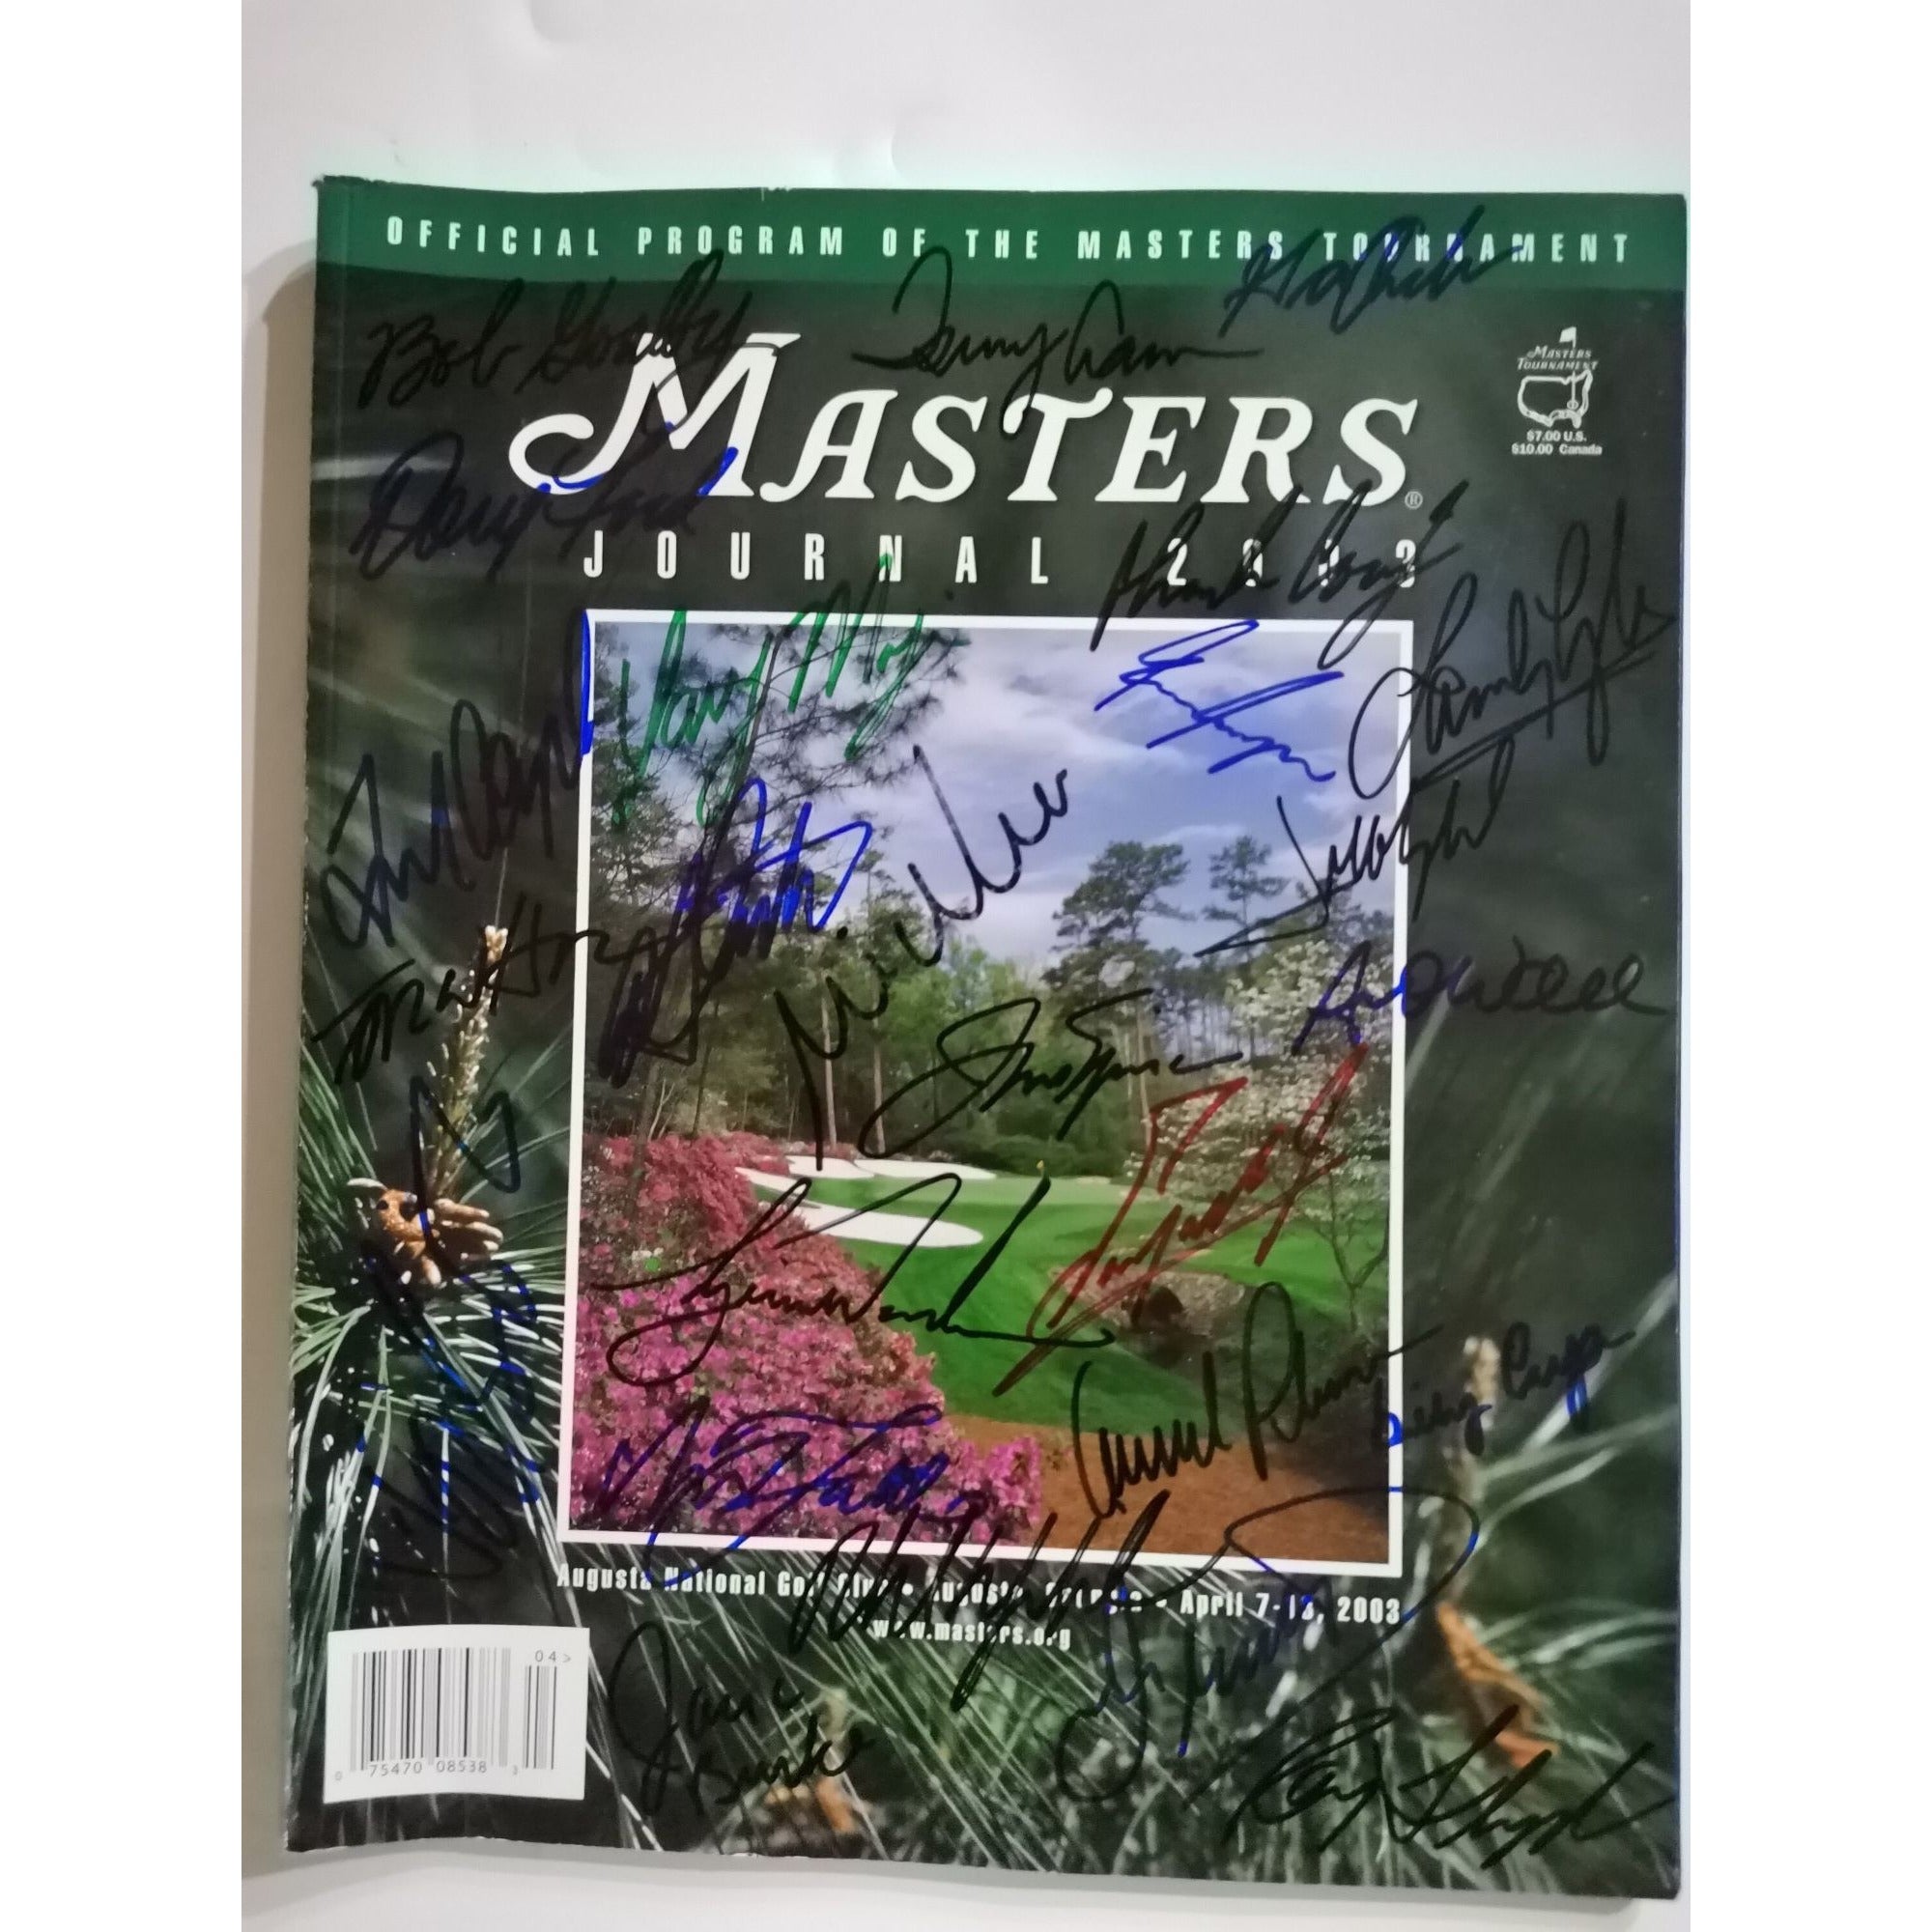 Tiger Woods Arnold Palmer Jack Nicklaus 20 Masters champions signed program with proof